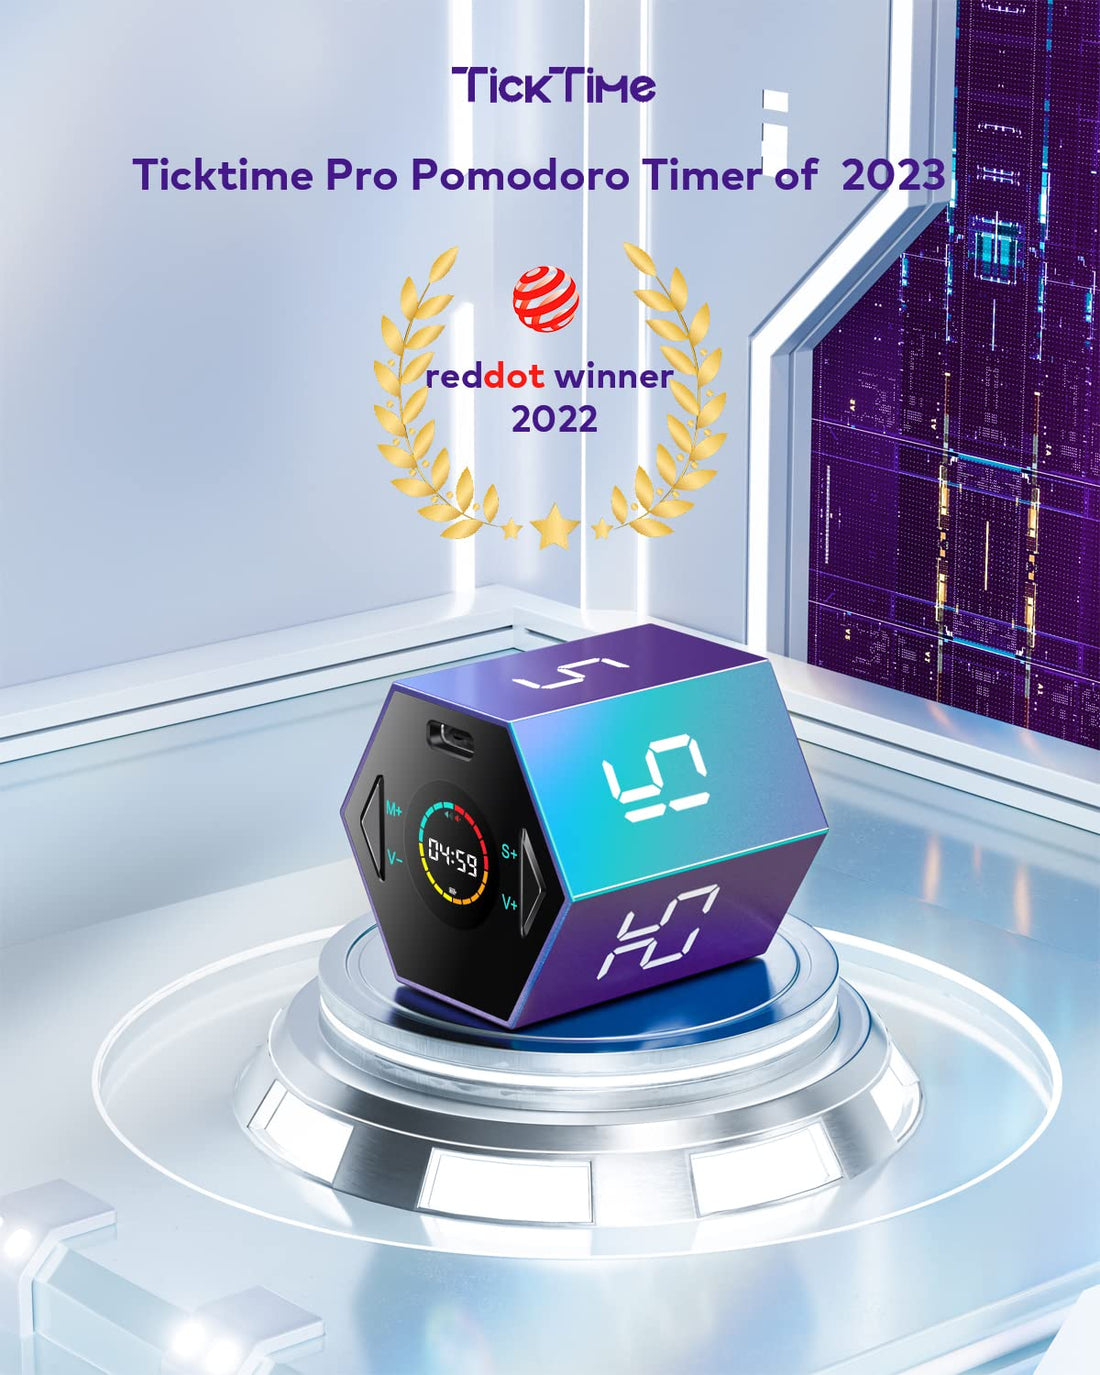 Ticktime Pro Pomodoro Timer, Productivity Cube Timer, Magnetic Flip Timer, Pause & Resume, Mute, Vibrate & Adjustable Sound Alert, for Task, Work, ADHD, 5/15/25/30/45/60min & Custom Countdown, Purple